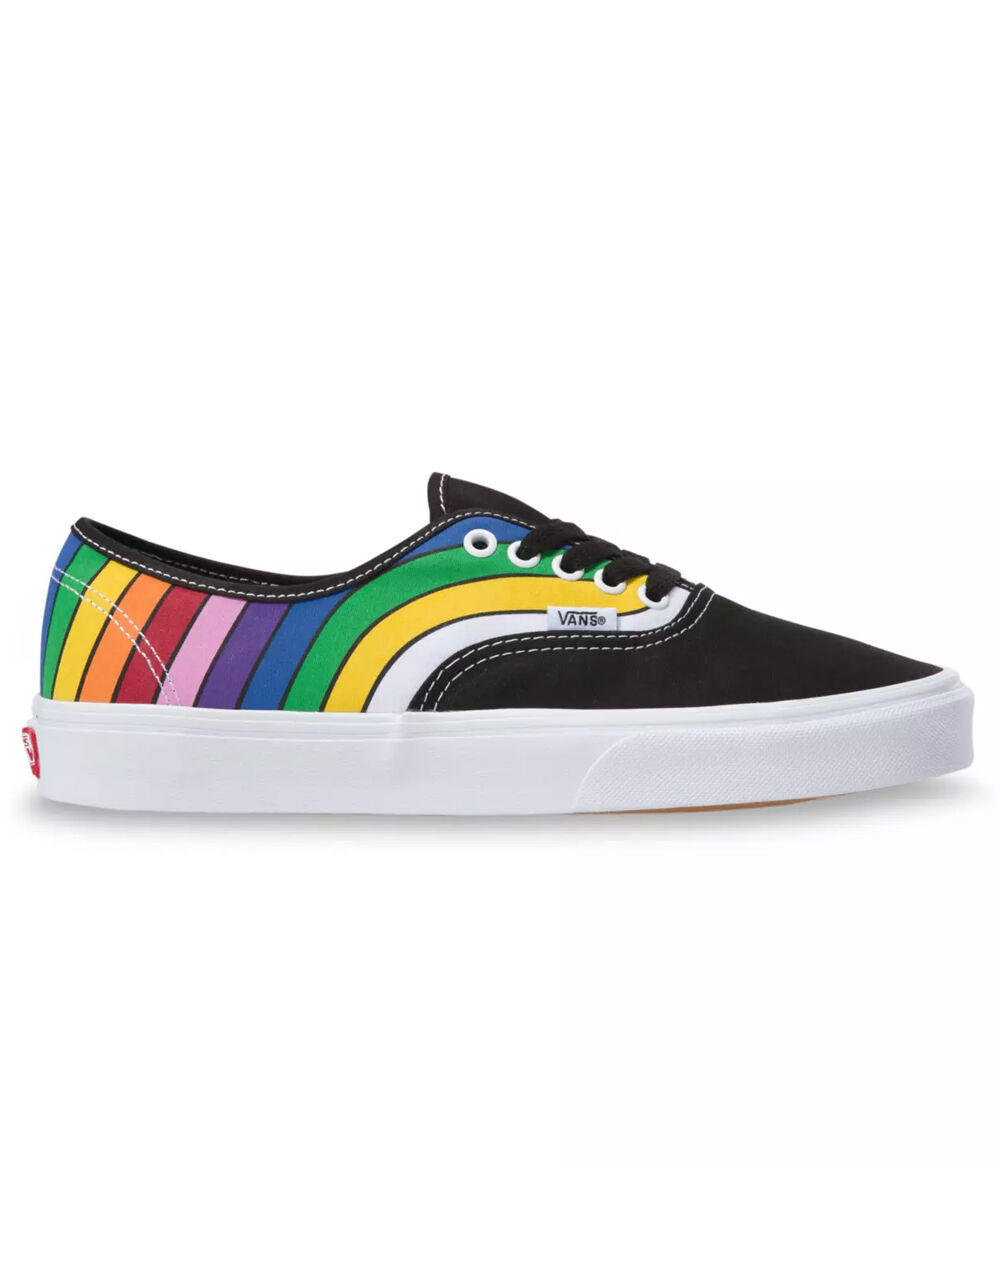 VANS Refract Authentic Shoes image number 0